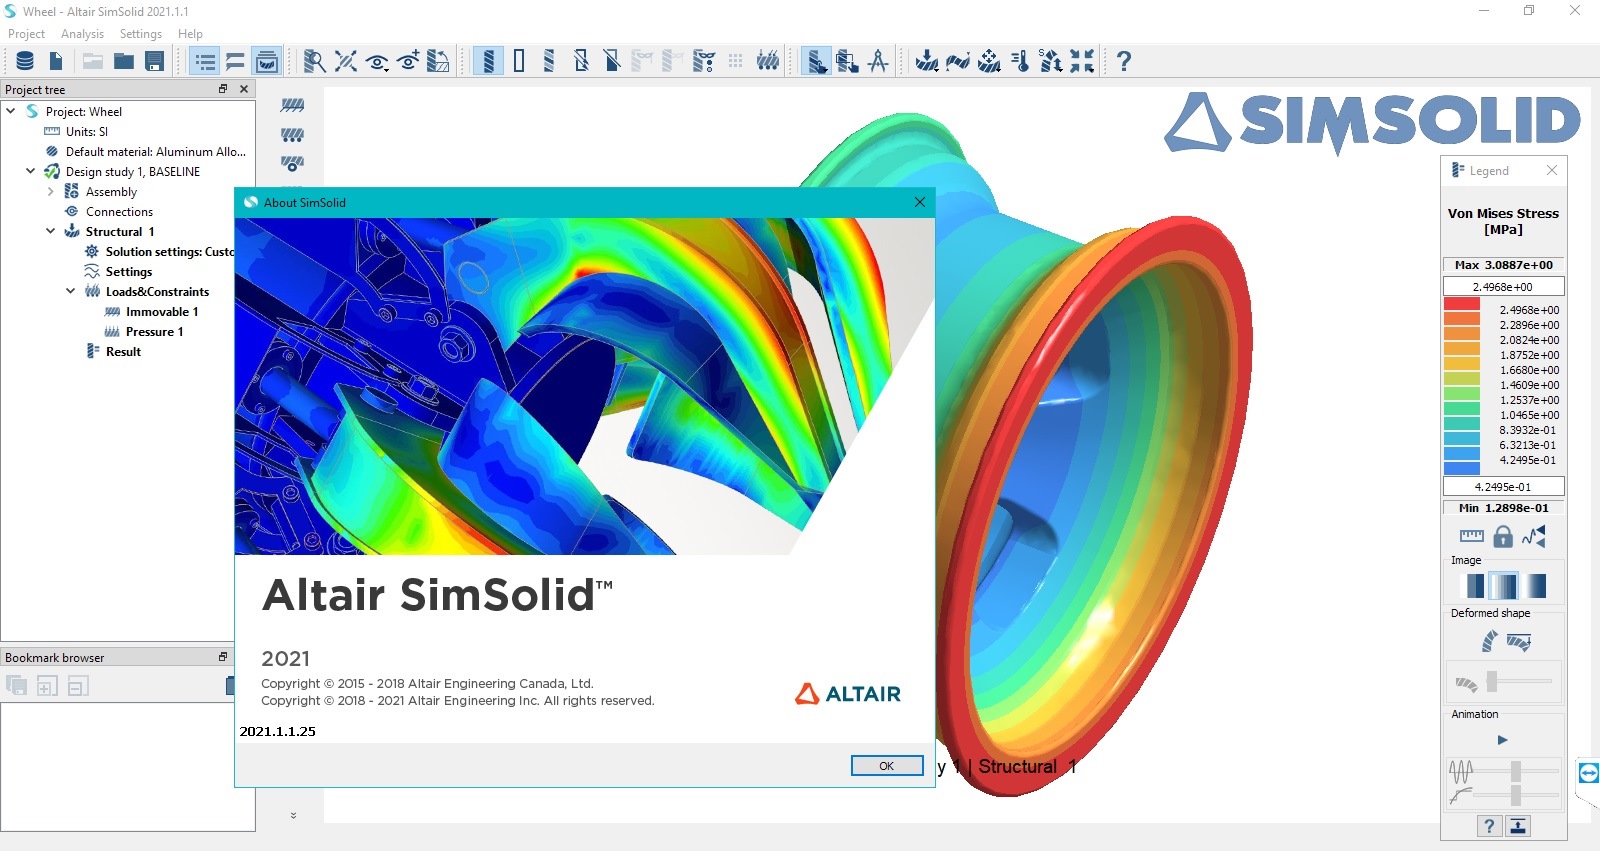 Working with Altair SimSolid 2021.1.1 full